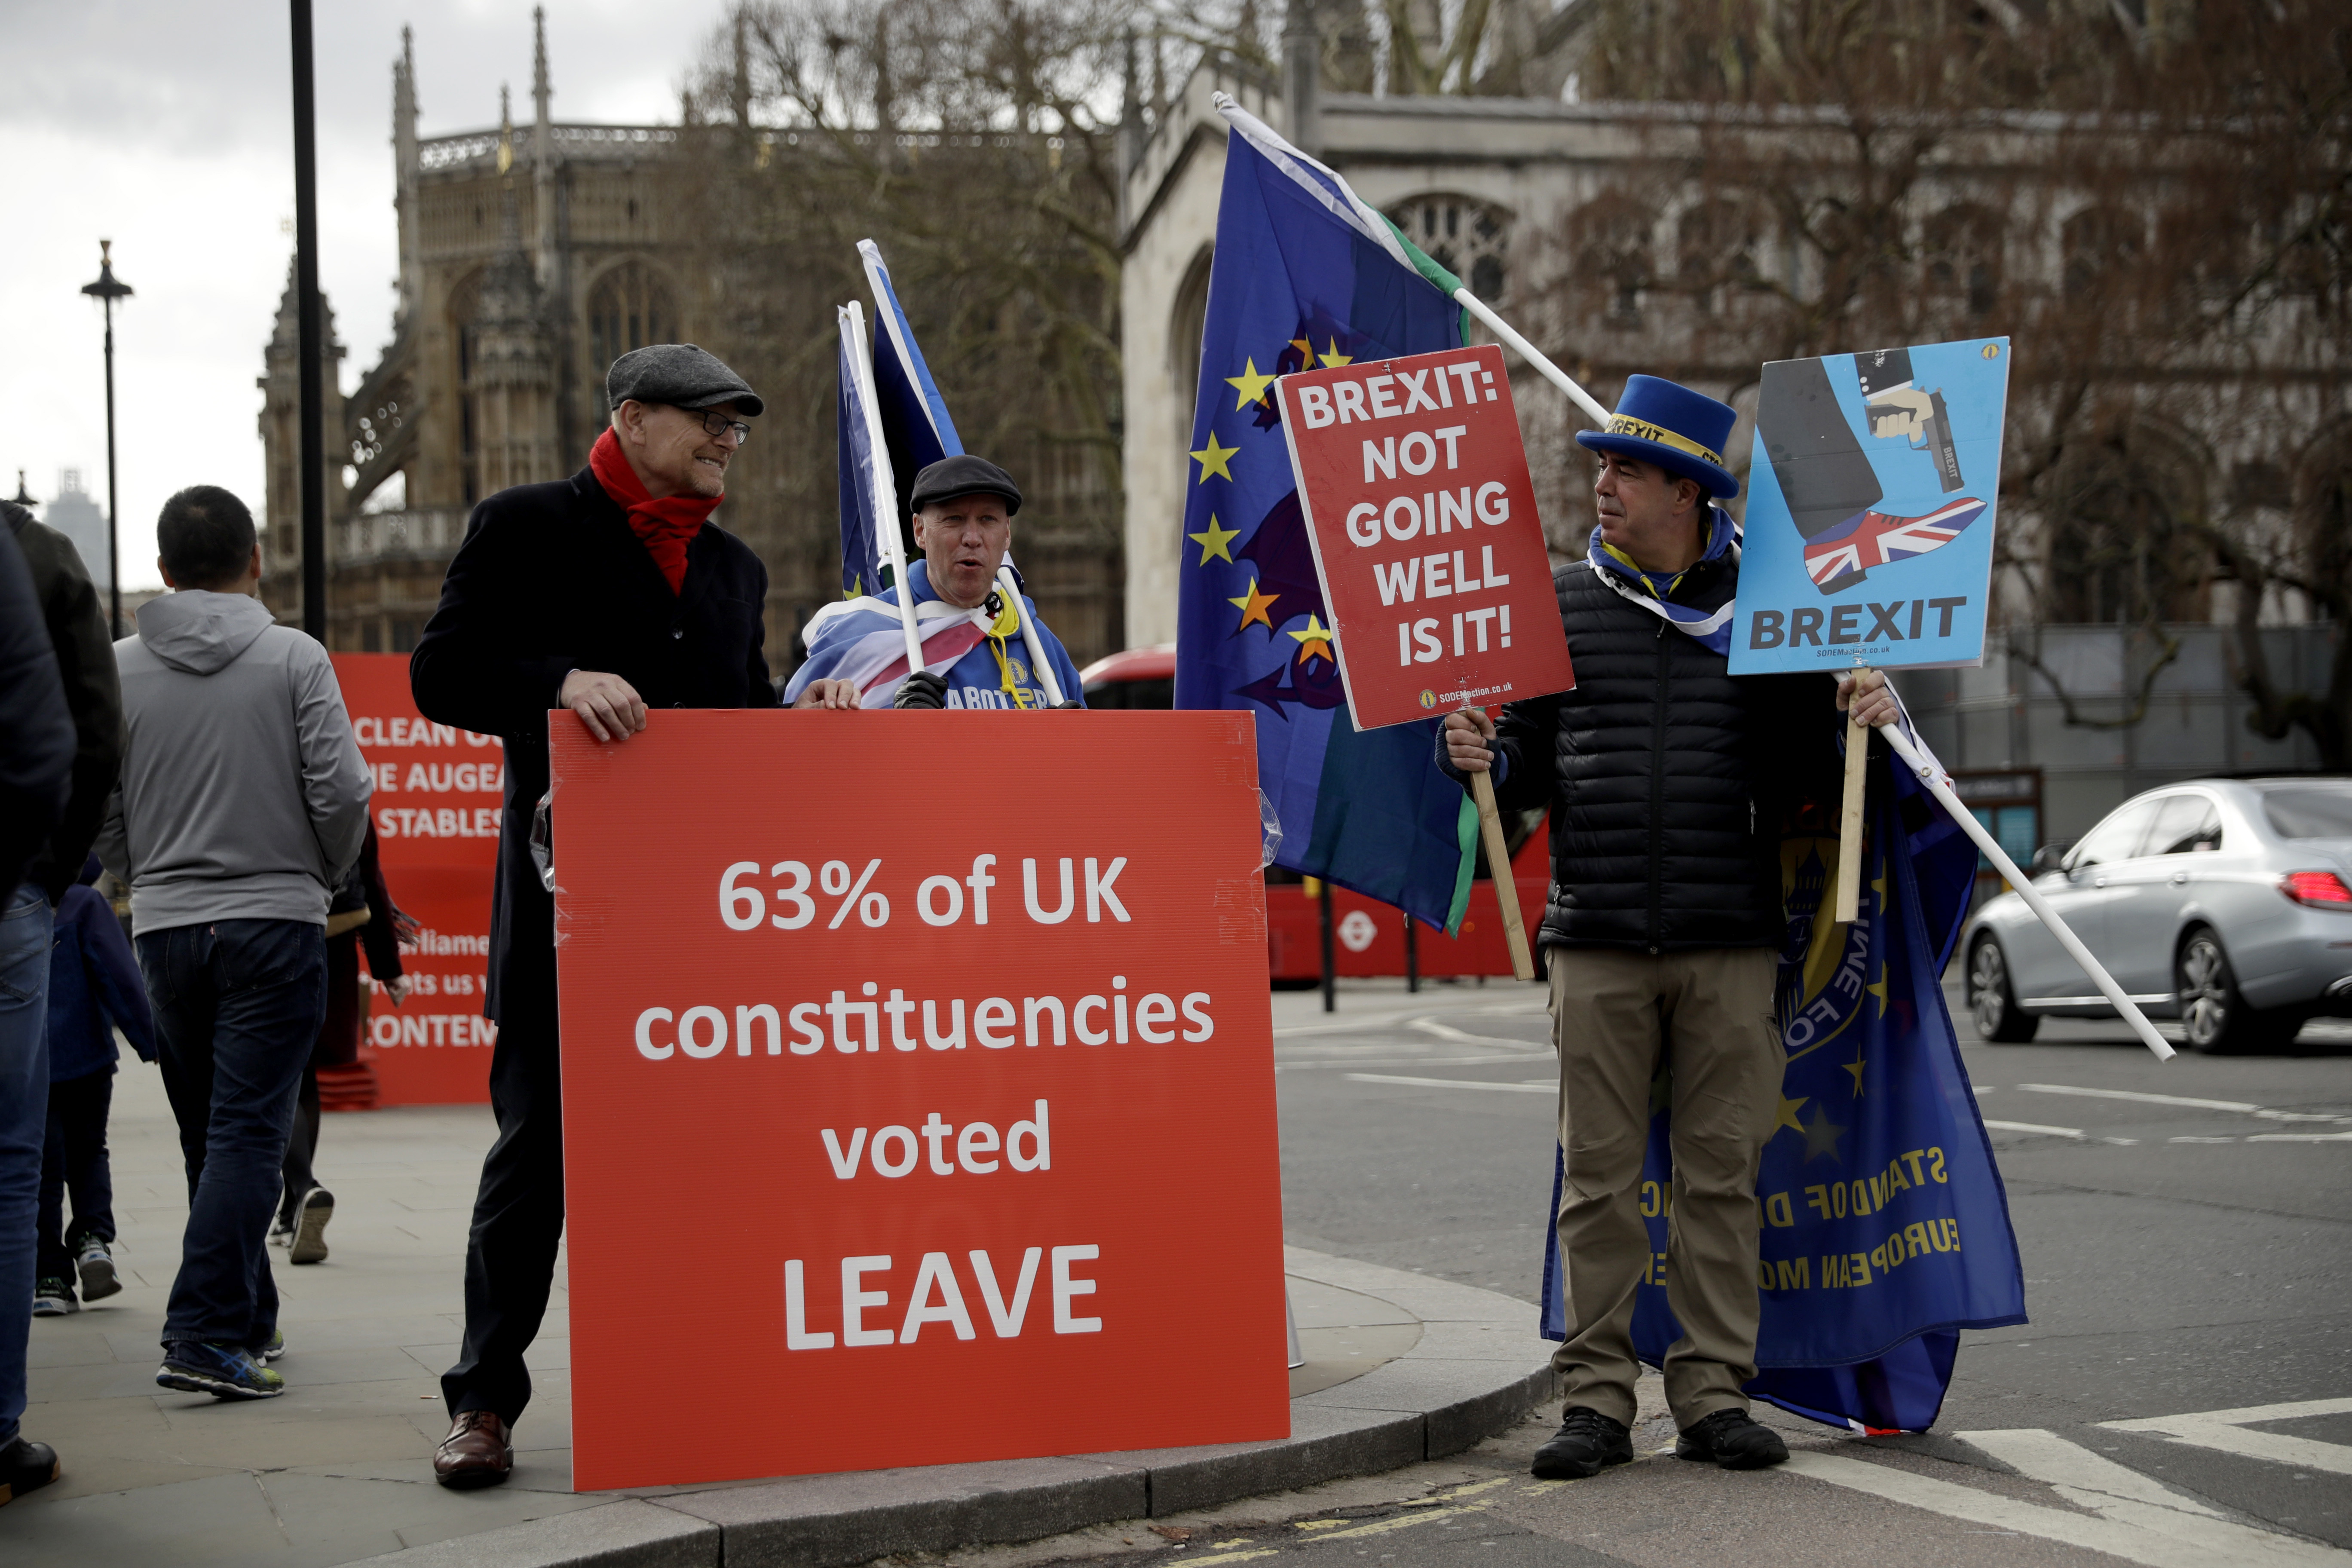 A pro-Brexit supporter, at left, protests next to anti-Brexit supporters protesting outside the Houses of Parliament in London, Monday, March 18, 2019. British Prime Minister Theresa May was making a last-minute push Monday to win support for her European Union divorce deal, warning opponents that failure to approve it would mean a long — and possibly indefinite — delay to Brexit. Parliament has rejected the agreement twice, but May aims to try a third time this week if she can persuade enough lawmakers to change their minds. (AP Photo/Matt Dunham)